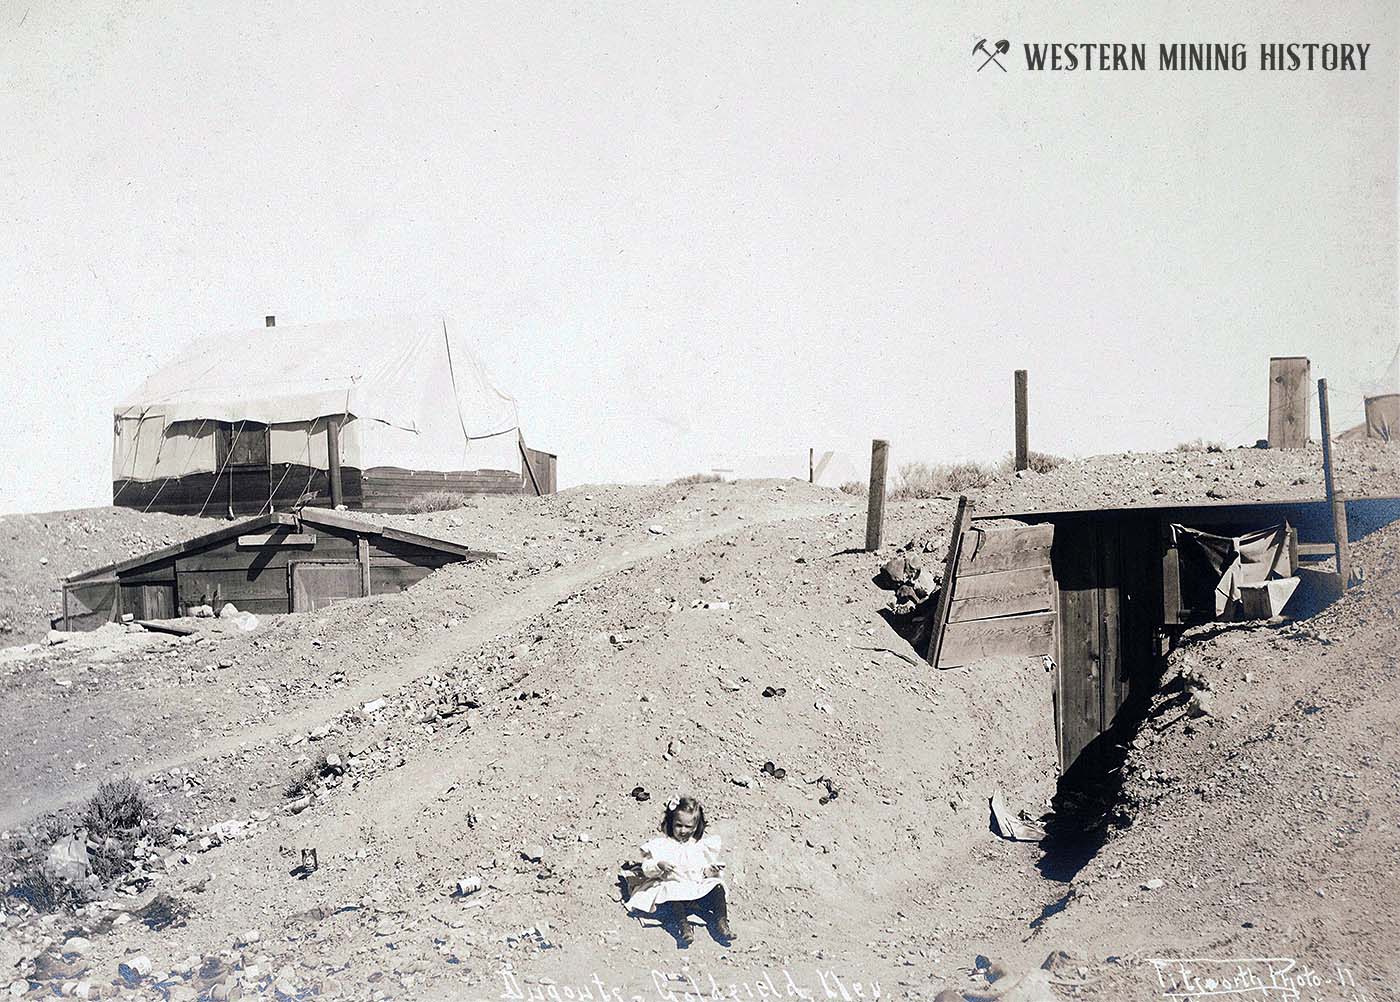 Child sits in front of Dugout cabin in Goldfield, Nevada